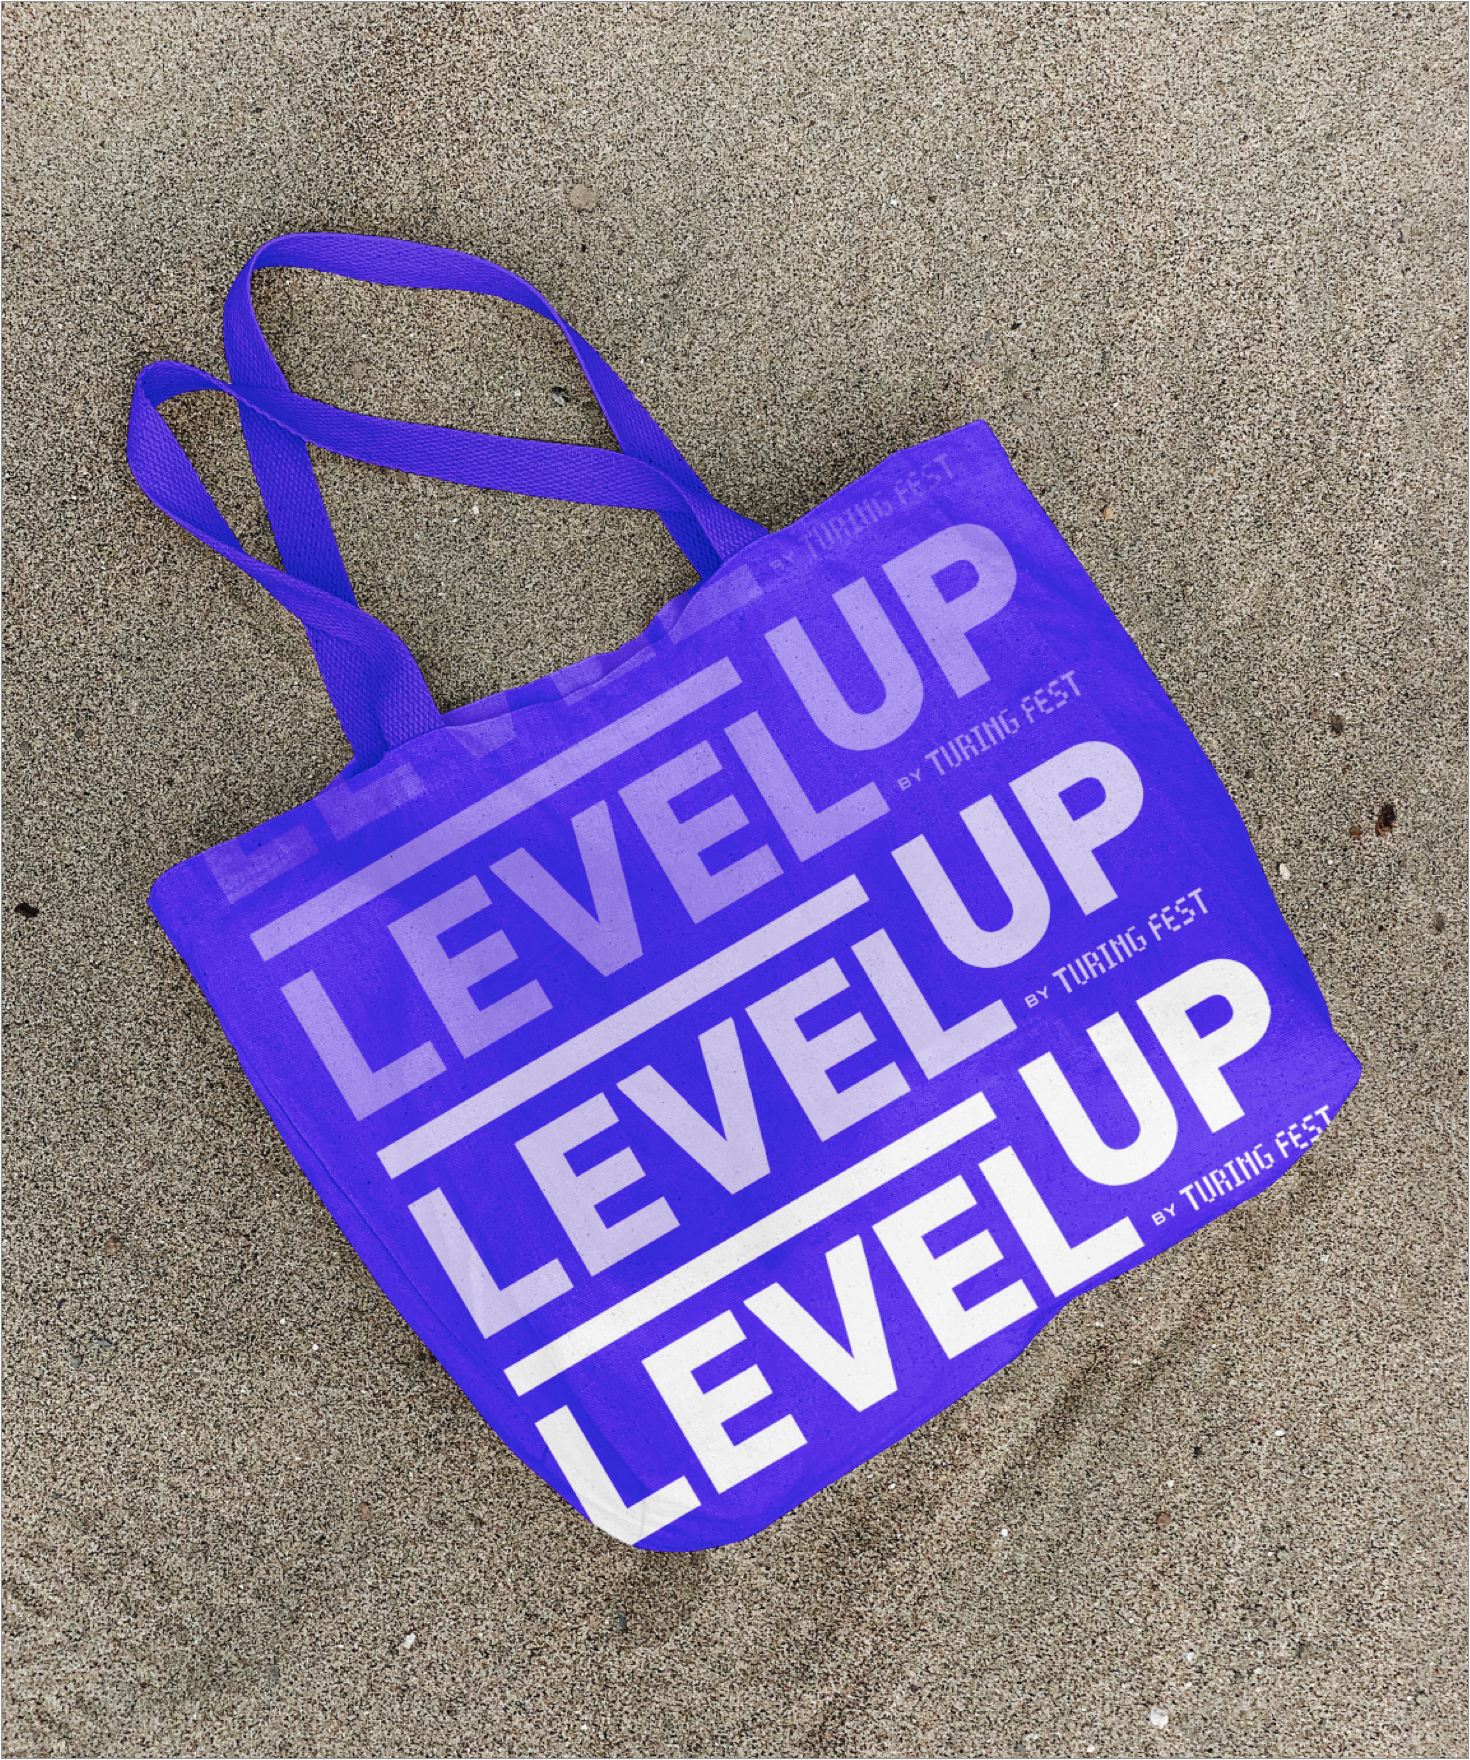 An example of promotional swag; a blue ‘Level Up’ canvas bag